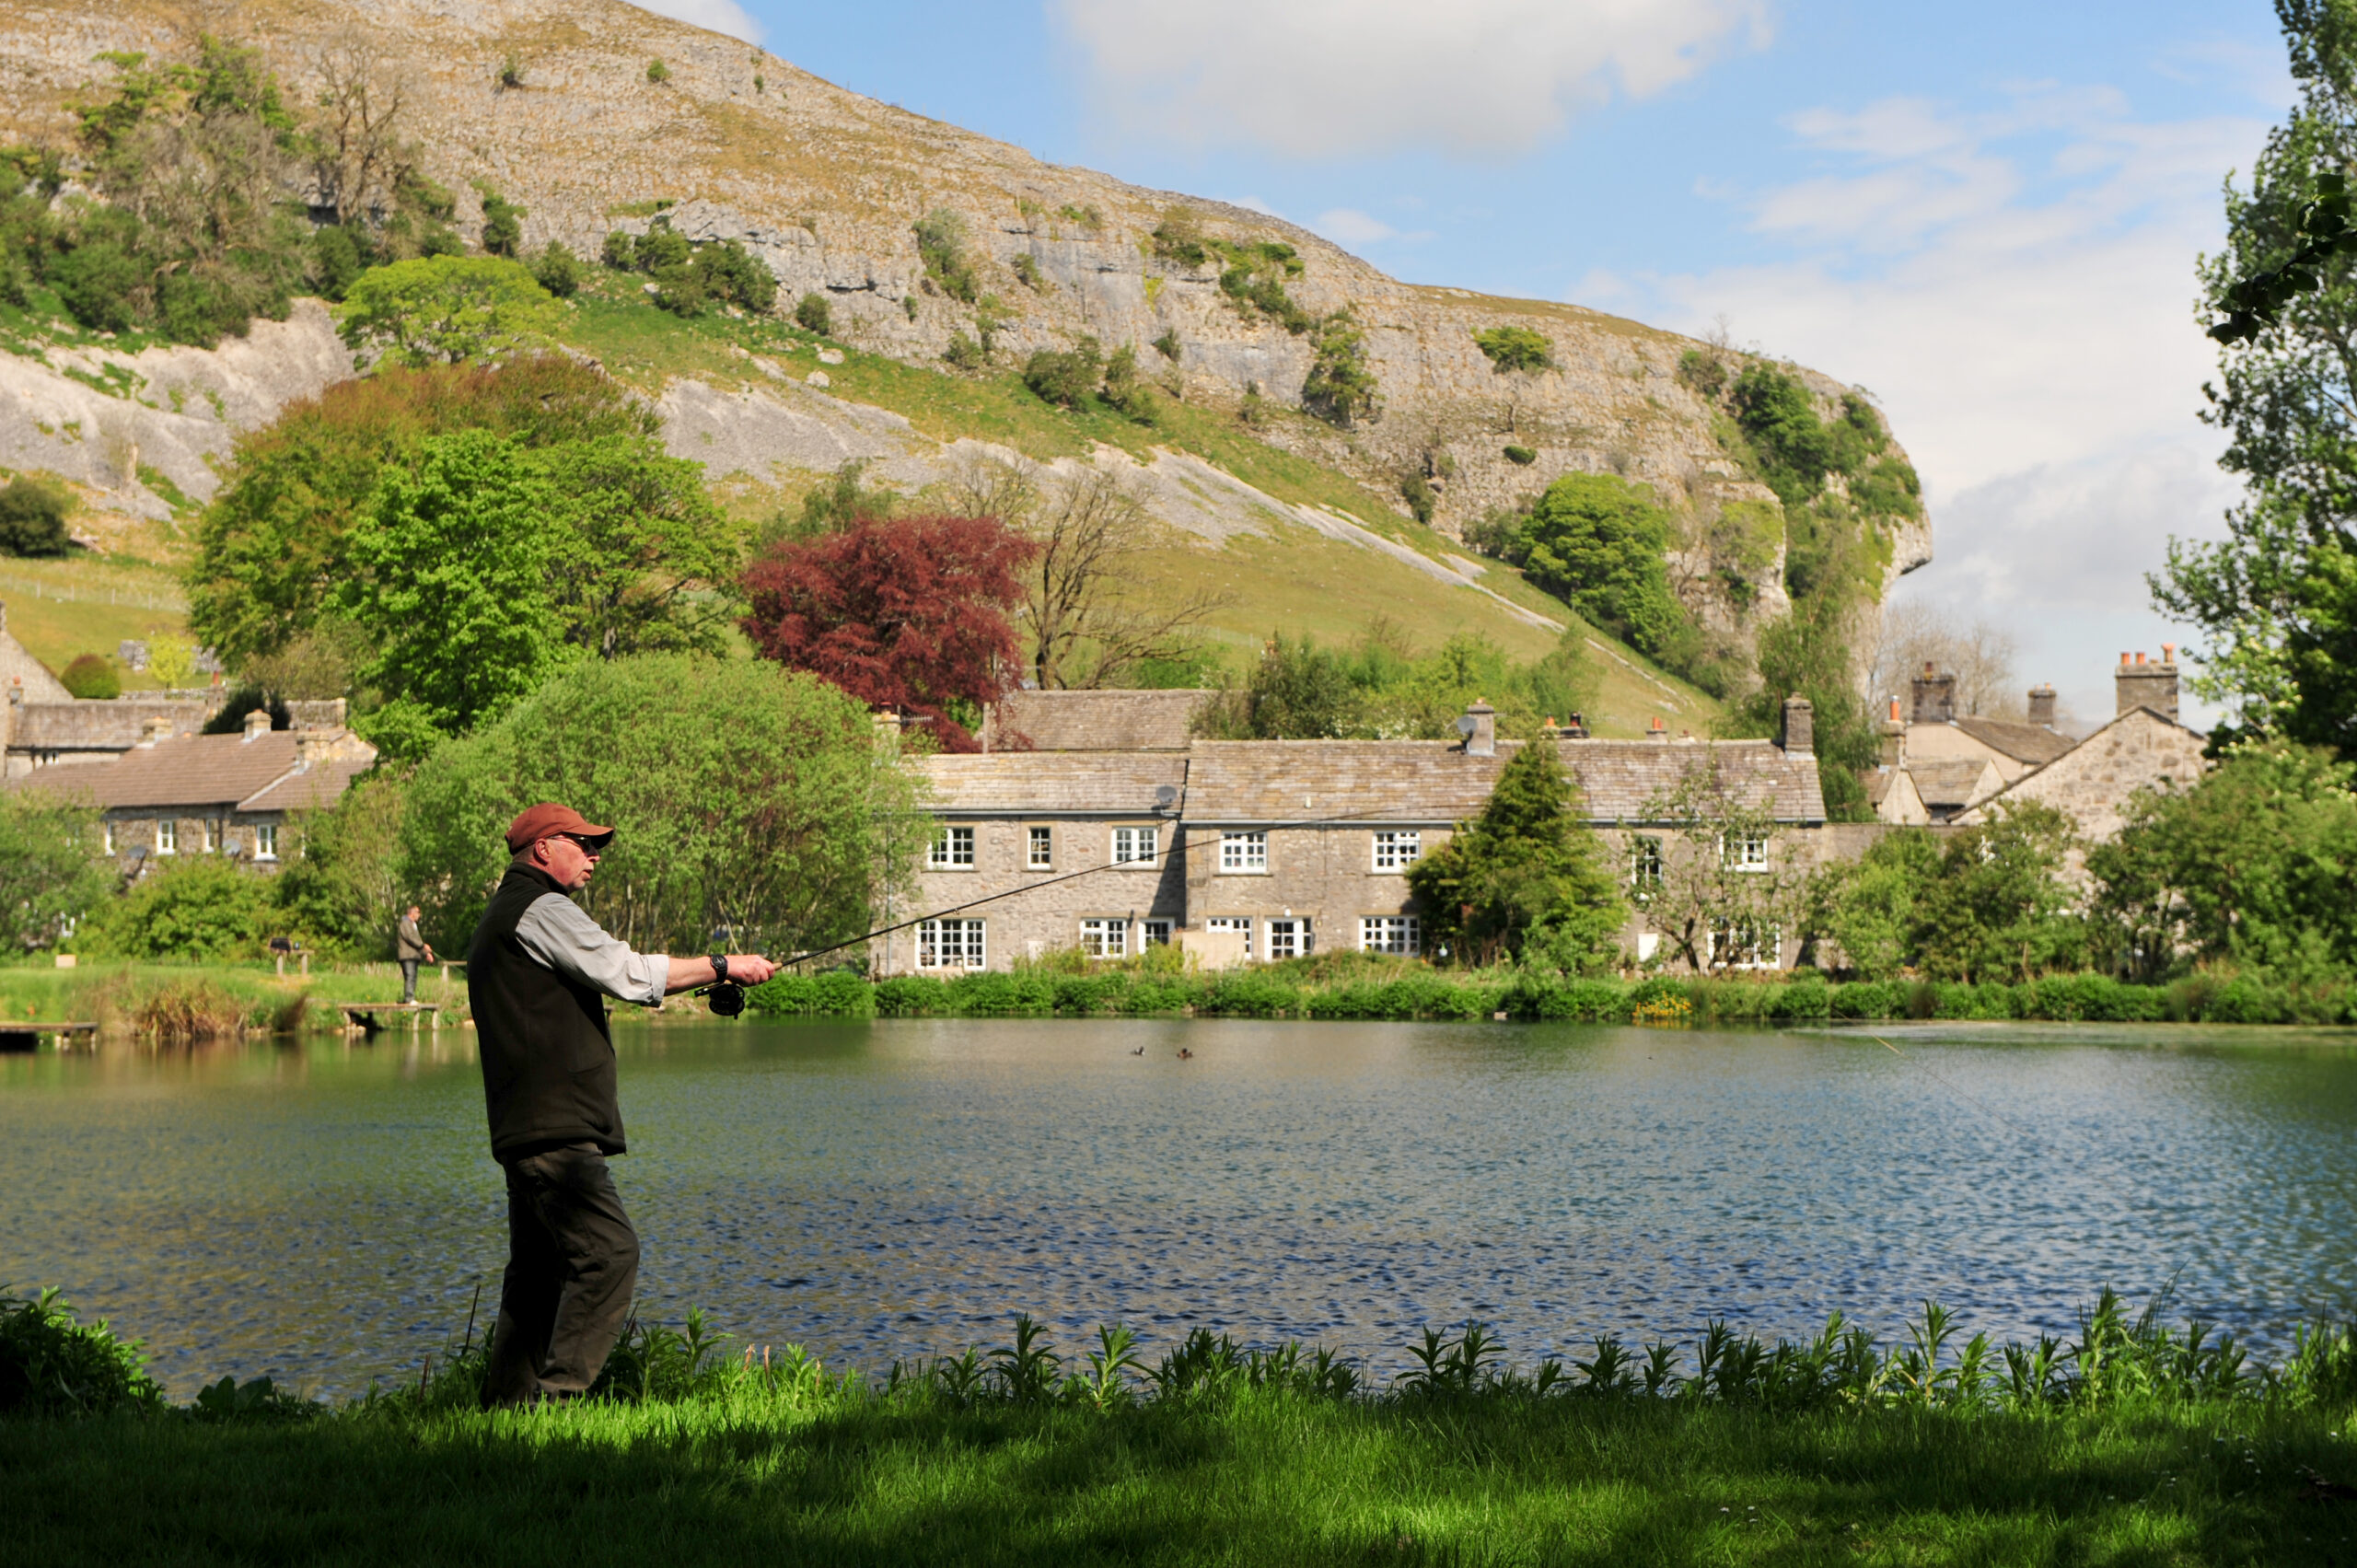 Image showing a fisherman at Kilnsey Park fishing lakes in the Yorkshire Dales.